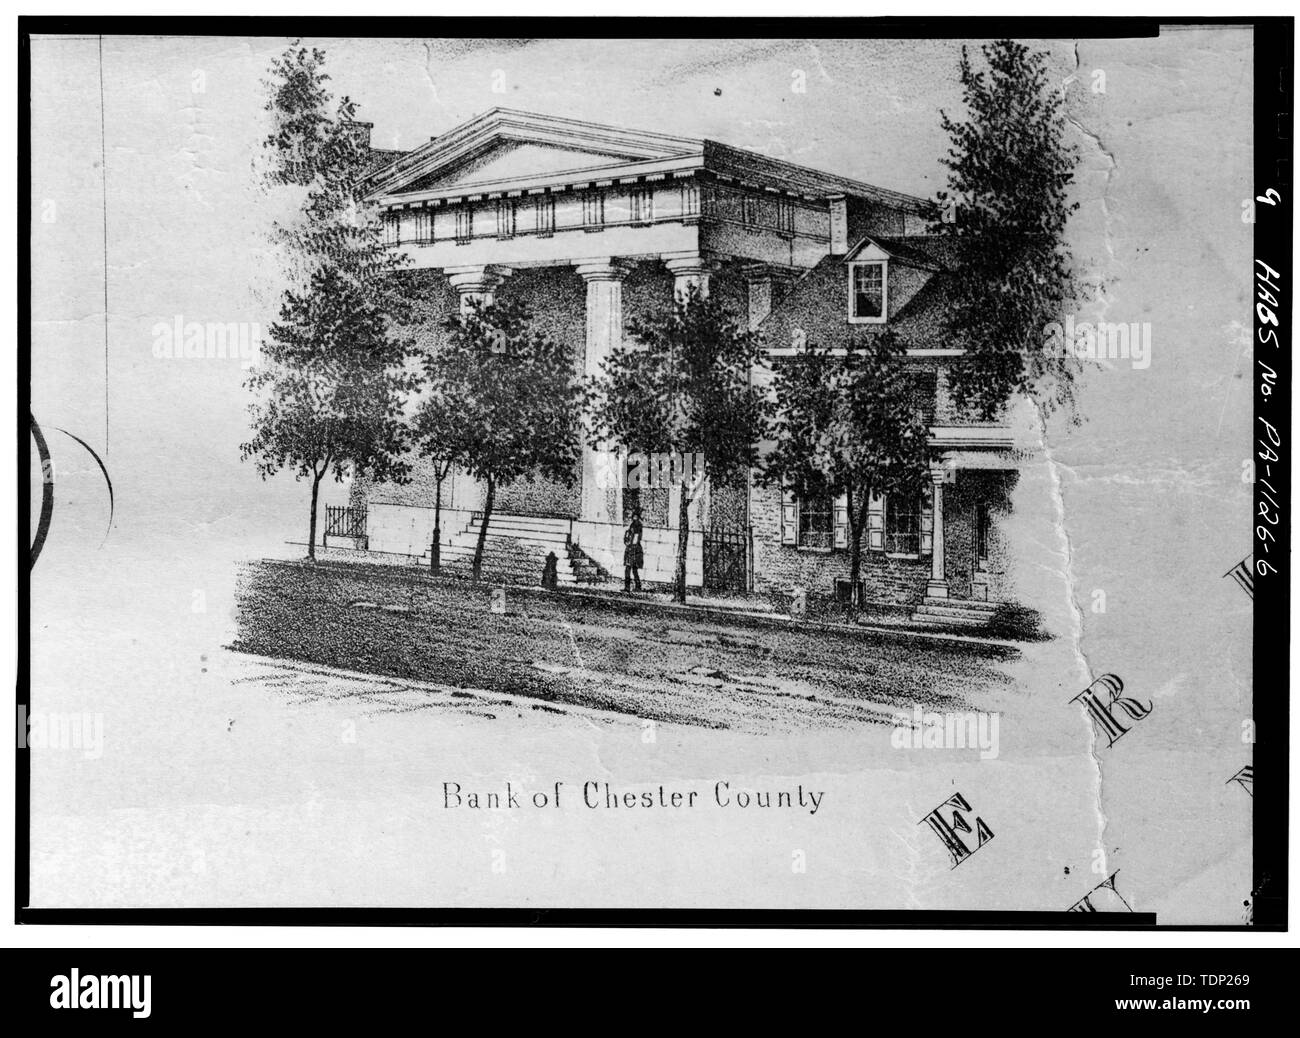 Photocopy of illustration on Map of Chester County Pennsylvania, by T.J. Kennedy, published by R.L. Barnes, Philadelphia, Pennsylvania, 1856 SOUTHWEST CORNER, 1856 - Bank of Chester County, 17 North High Street, West Chester, Chester County, PA Stock Photo